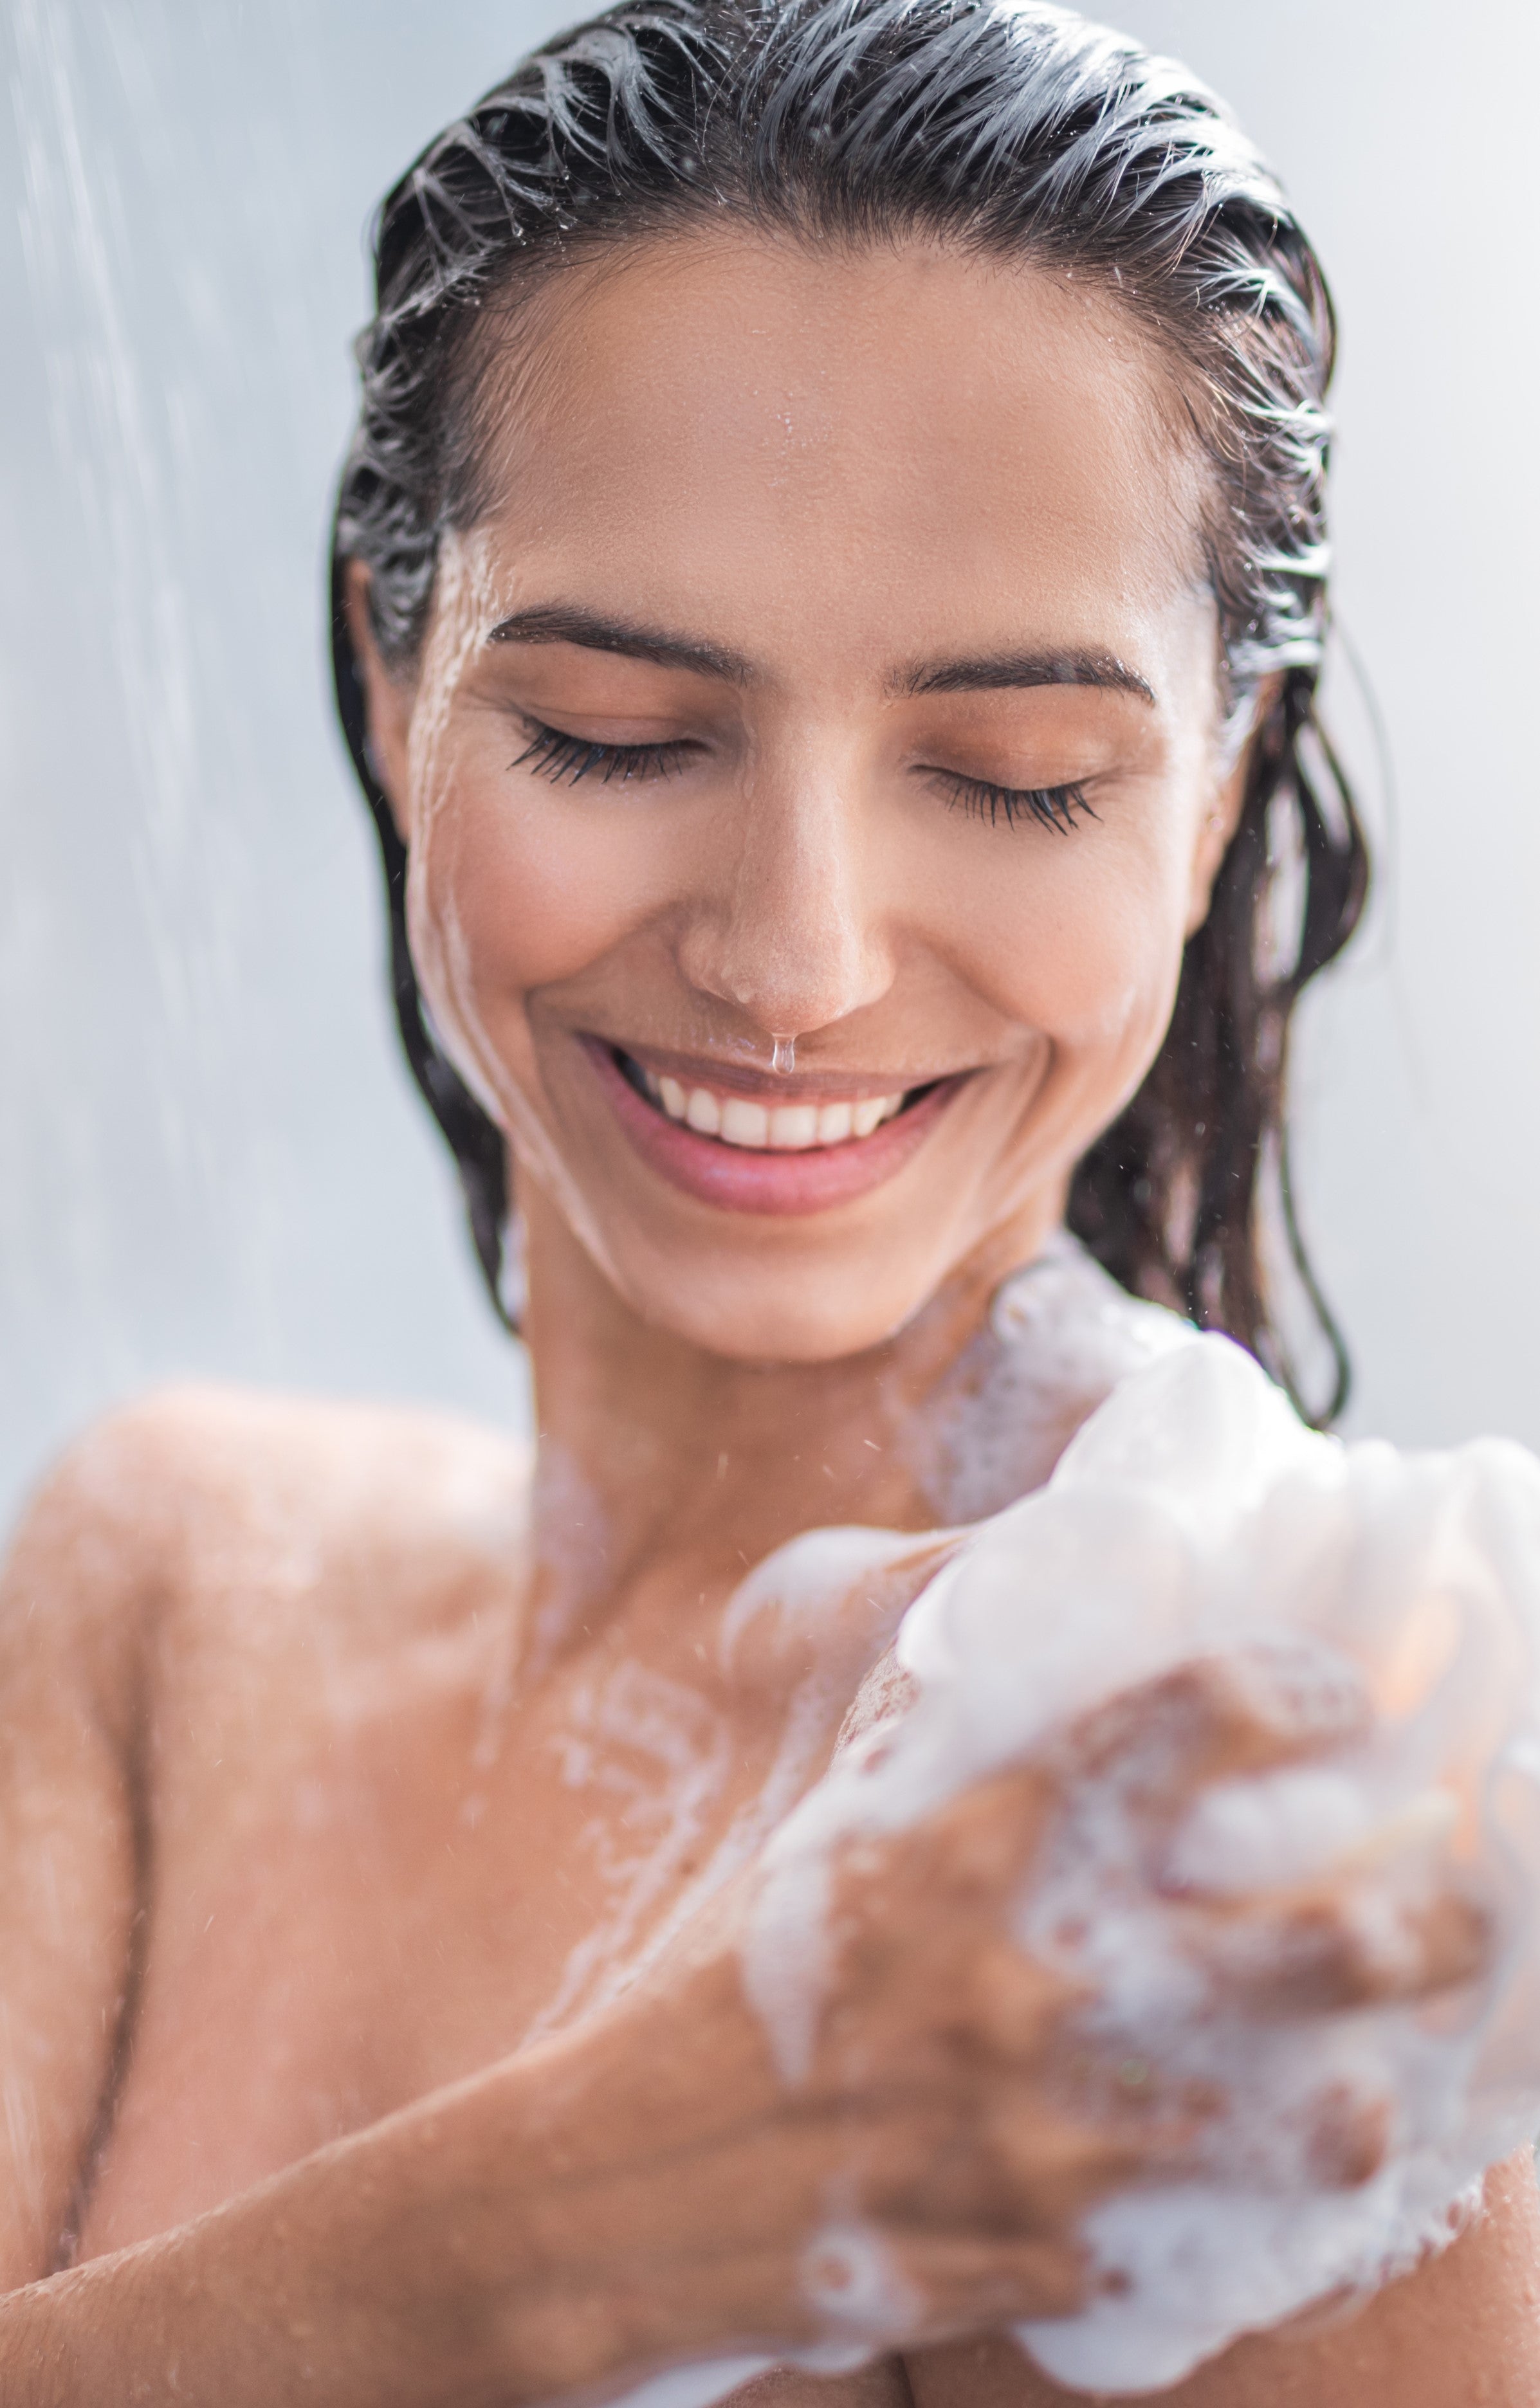 prevent skin infections from your shower sponge